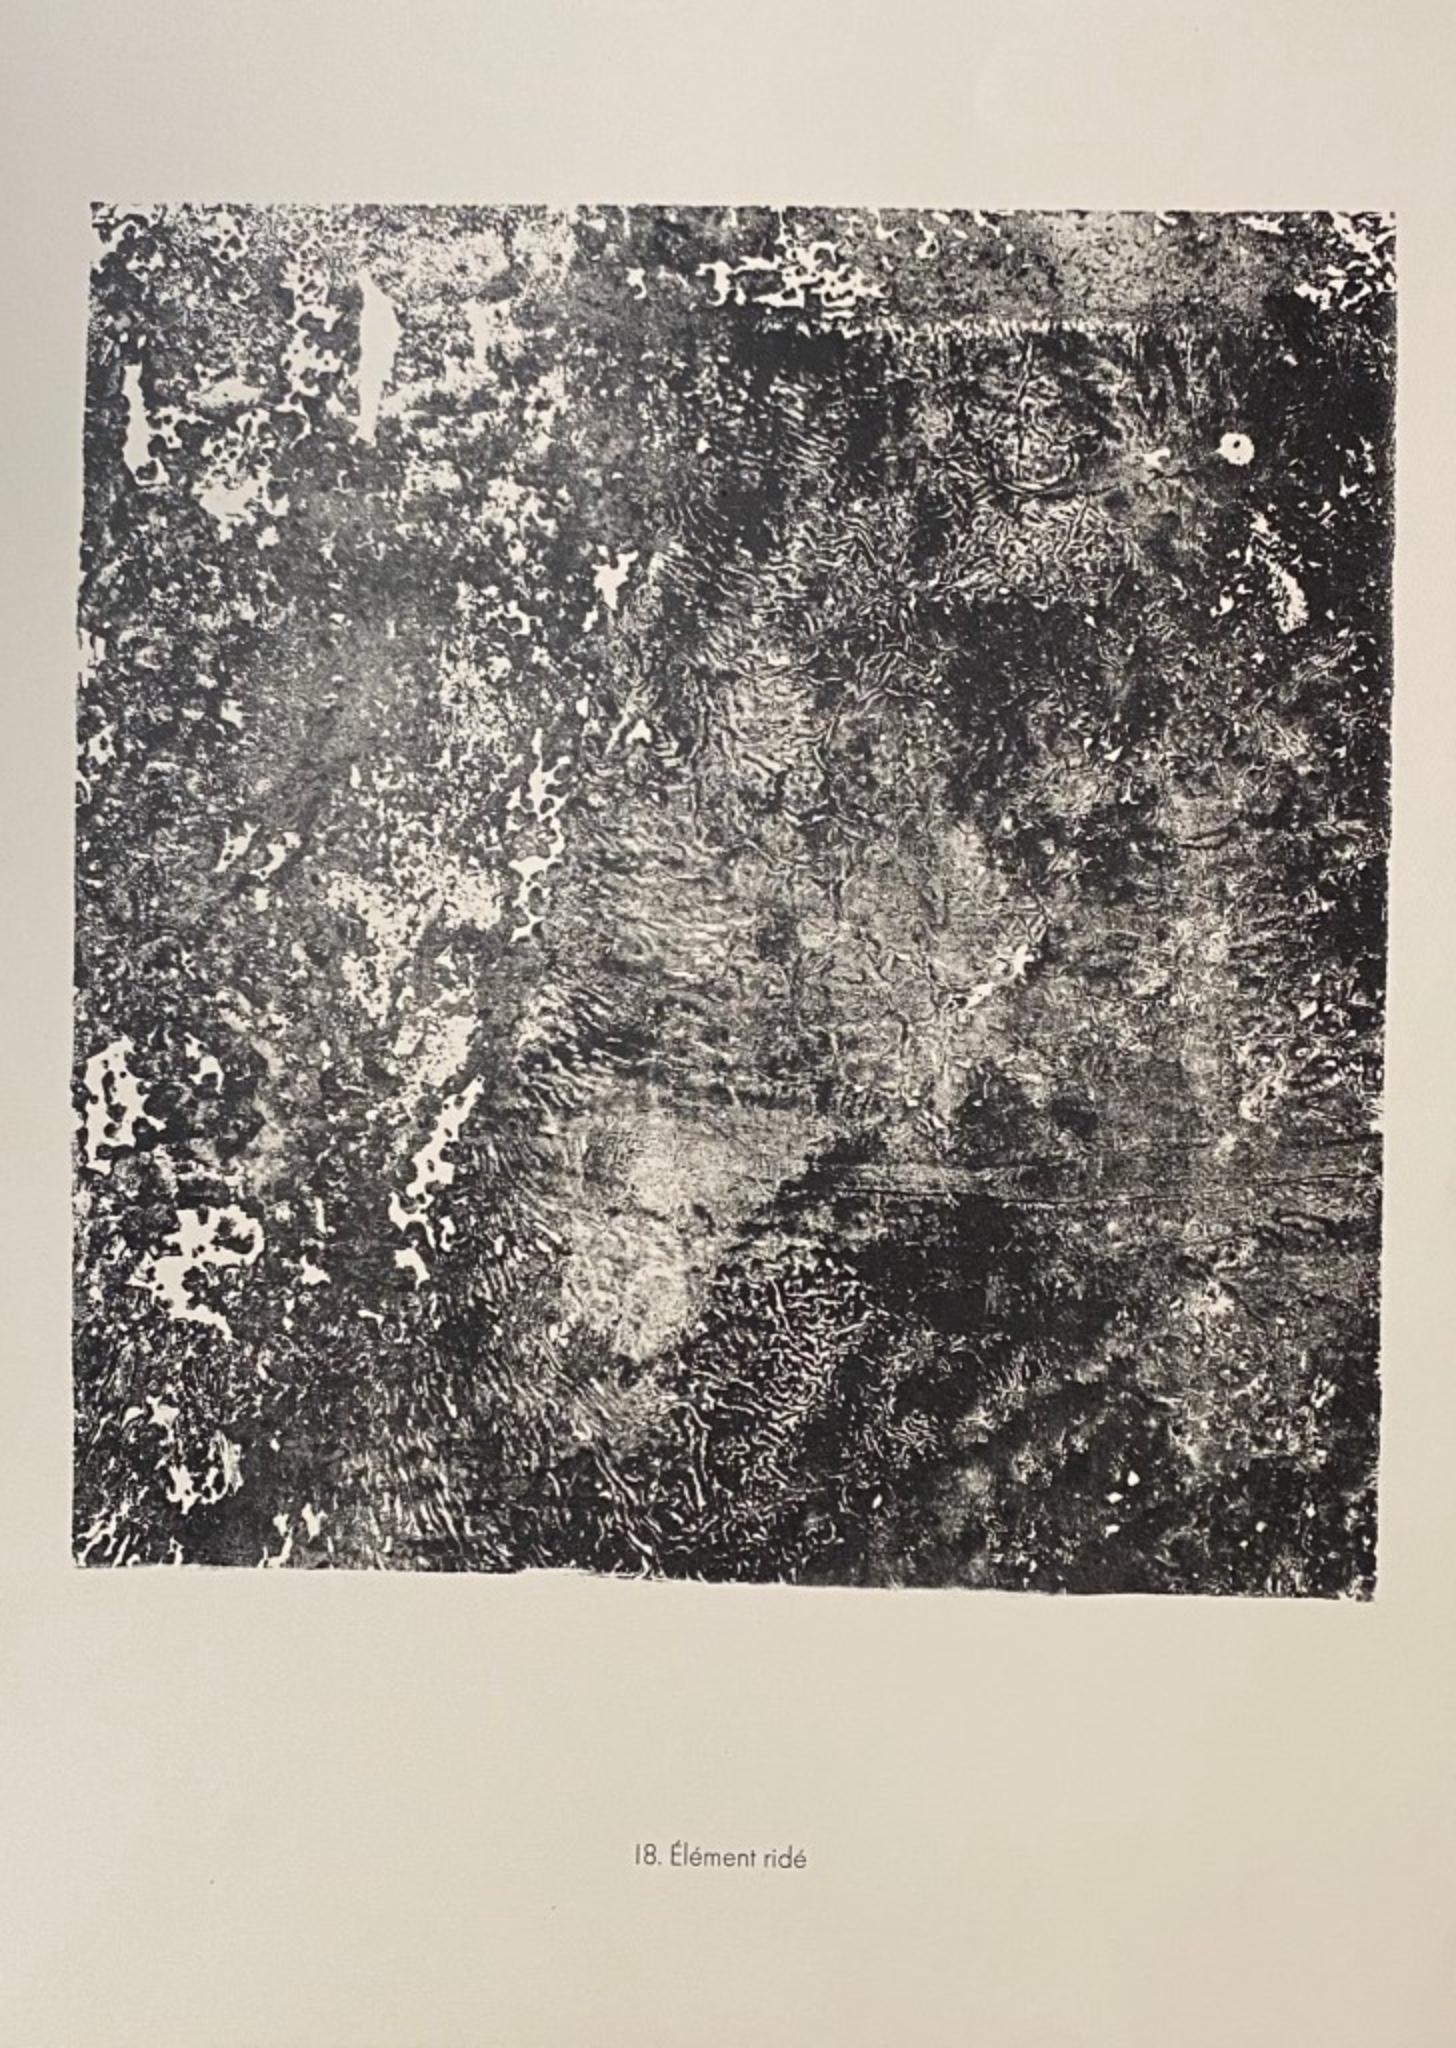 Element Ride is an original B/W lithograph on watermarked paper "Arc". Abstract composition by the French artist Jean Dubuffet. From the album of "Theatre du sol" (1953-1959). In excellent conditions.

Image Dimensions: 41 x 39 cm

Referements: Cat.